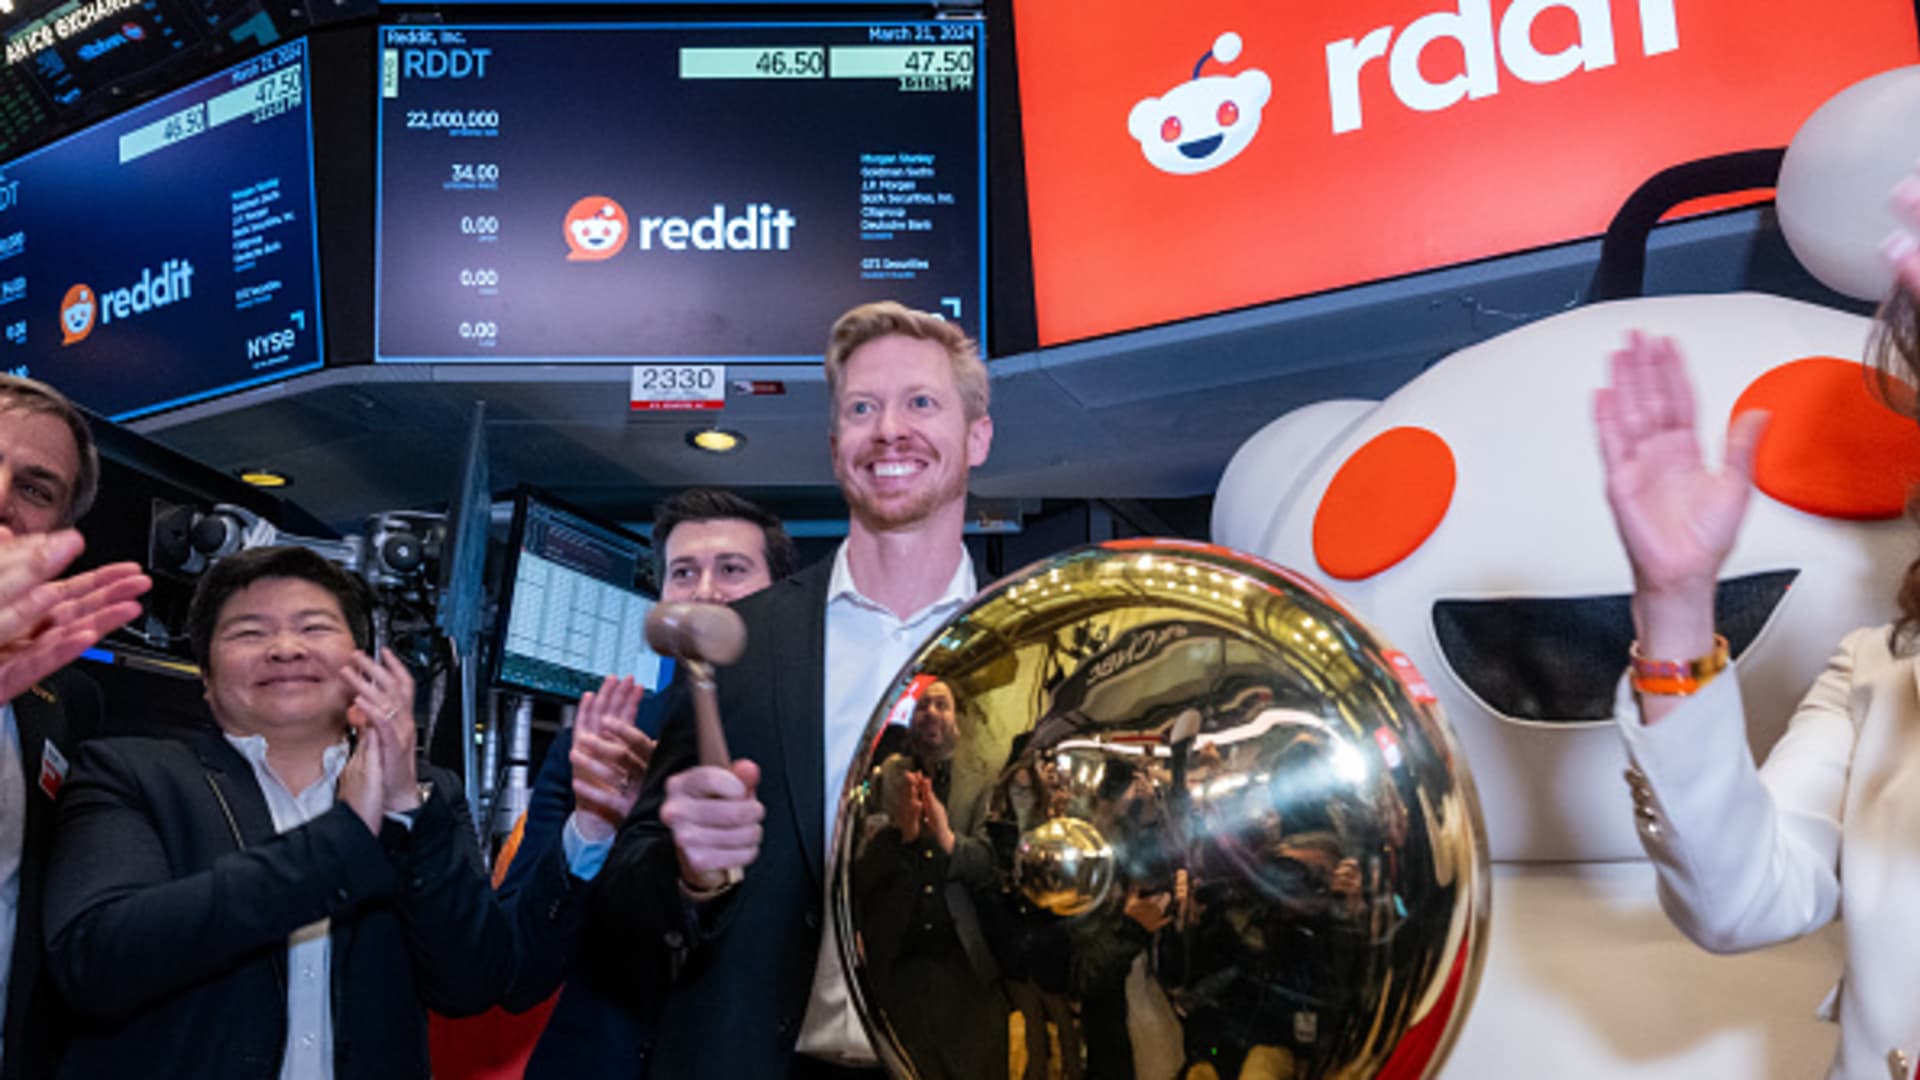 Reddit investors shrug off hold rating, bid up stock another 15% as post-IPO rally continues